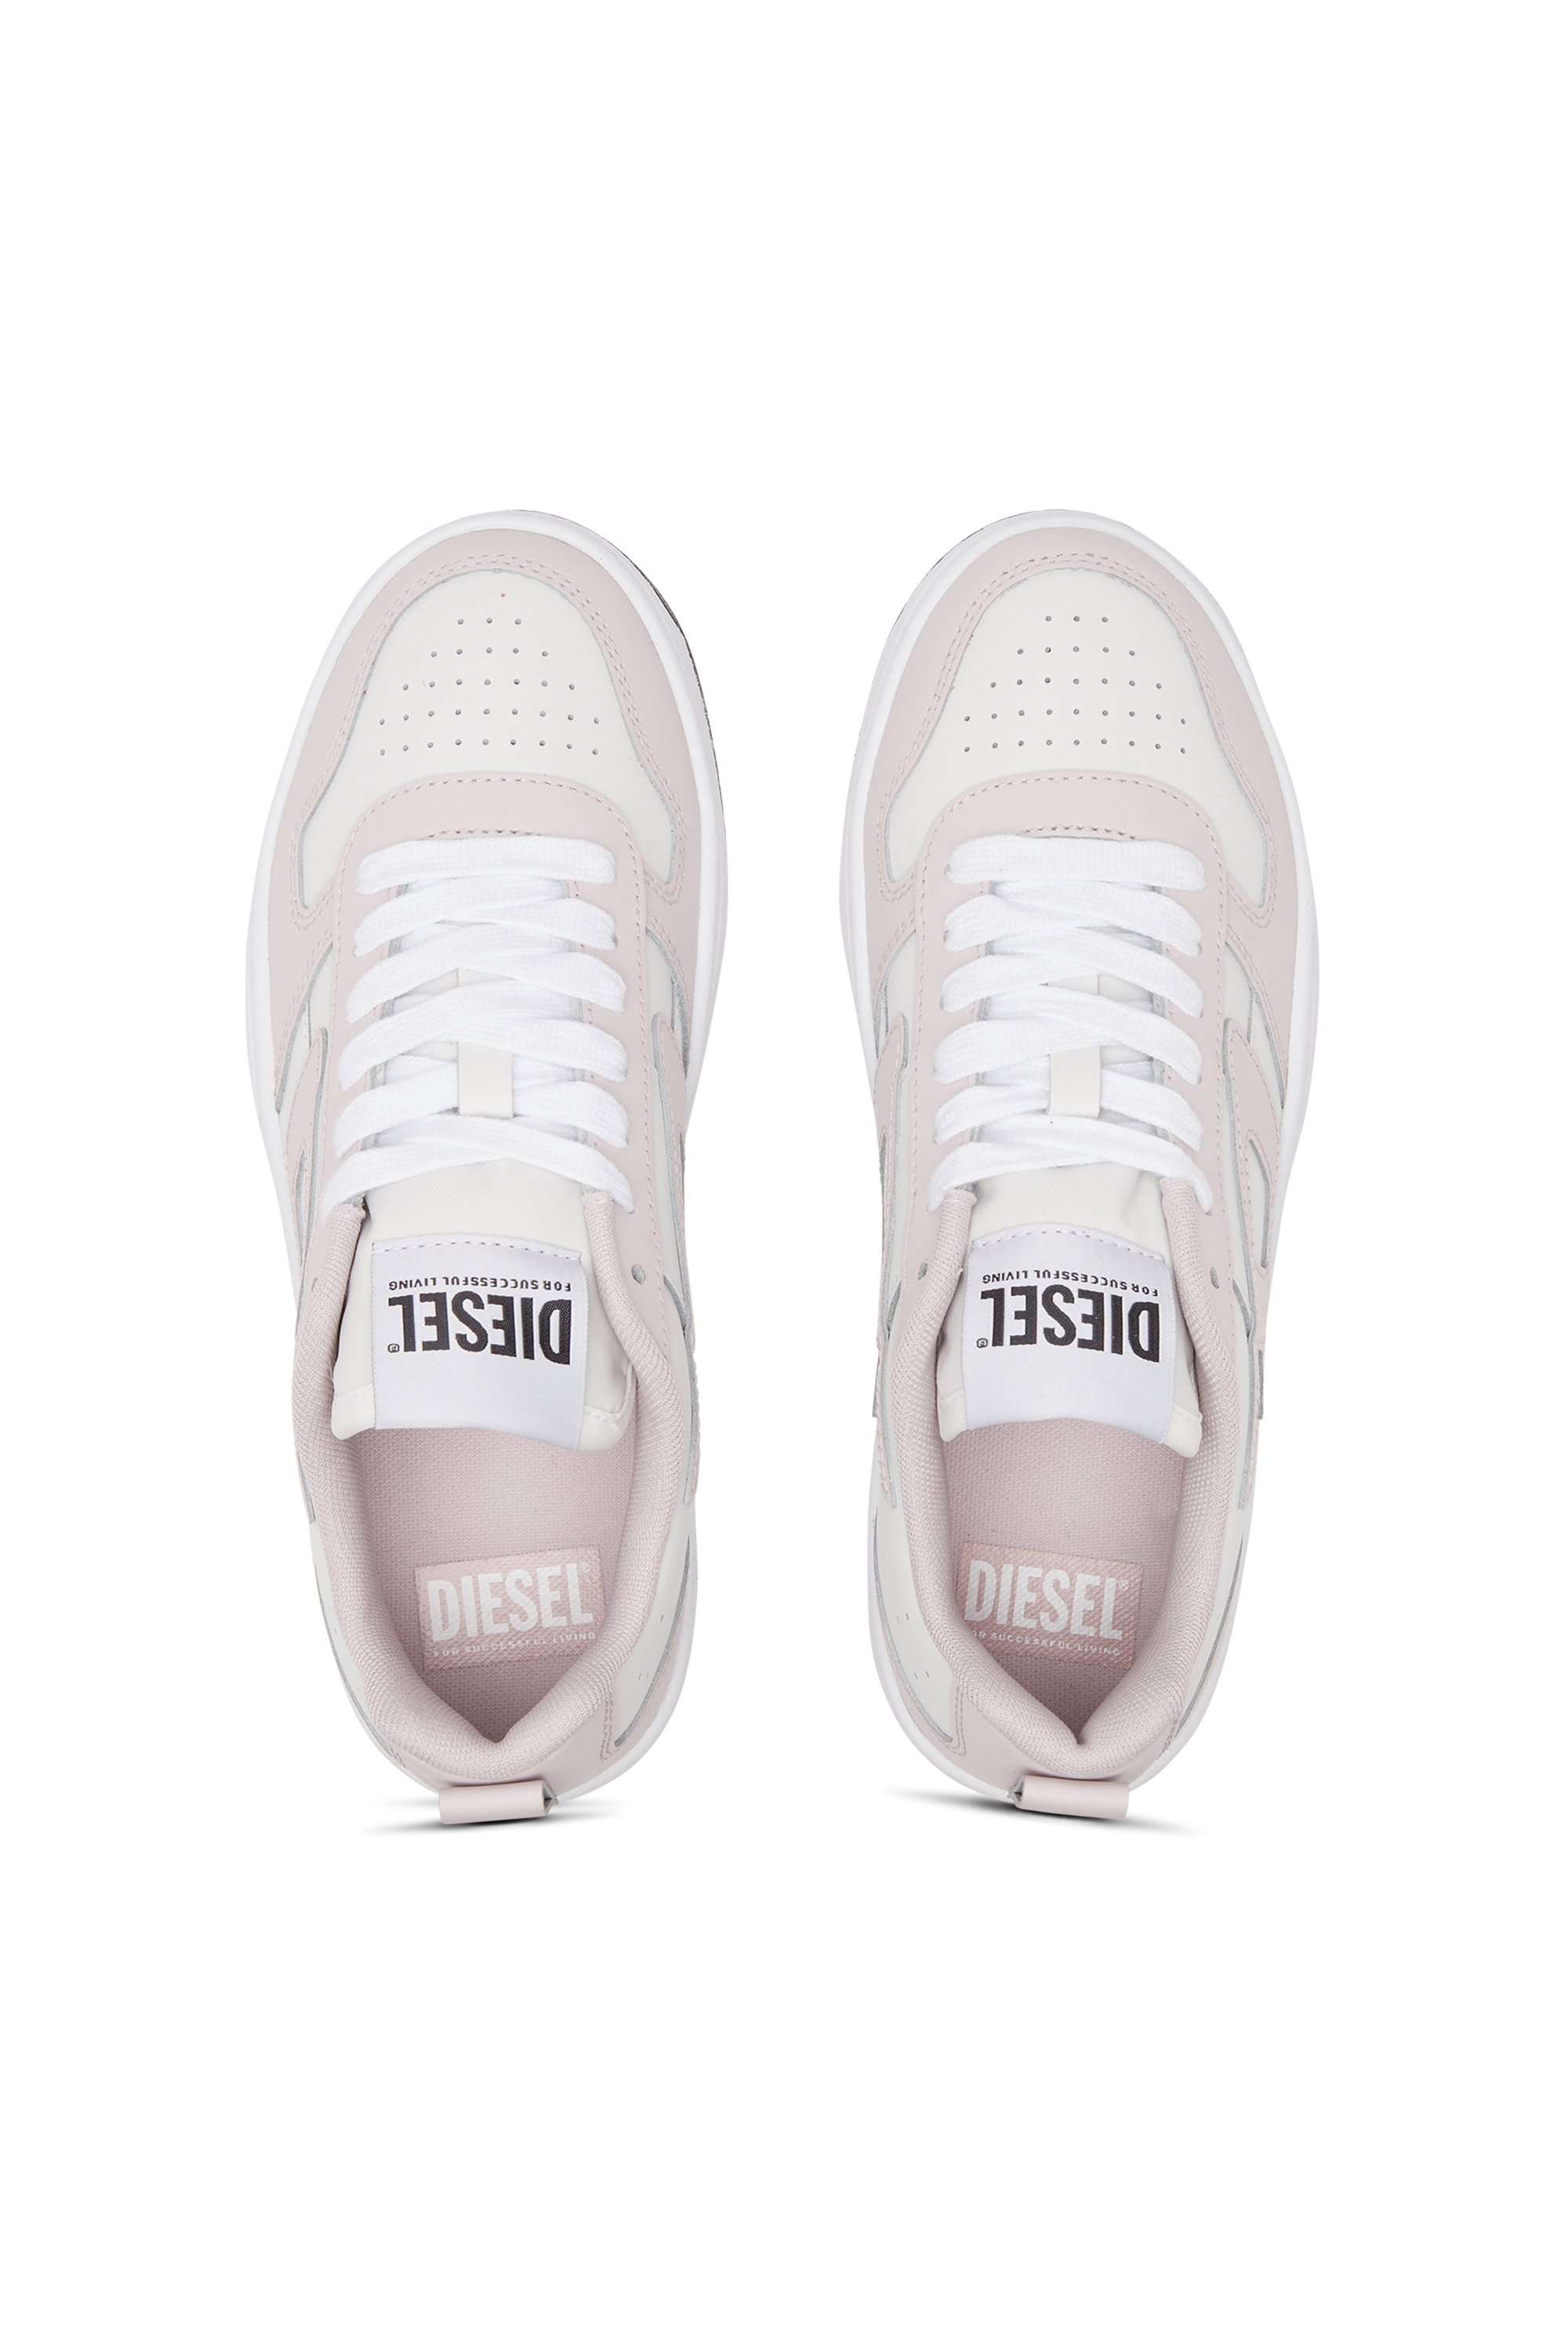 Diesel - S-UKIYO V2 LOW W, Woman S-Ukiyo Low-Low-top sneakers in leather and nylon in Multicolor - Image 5